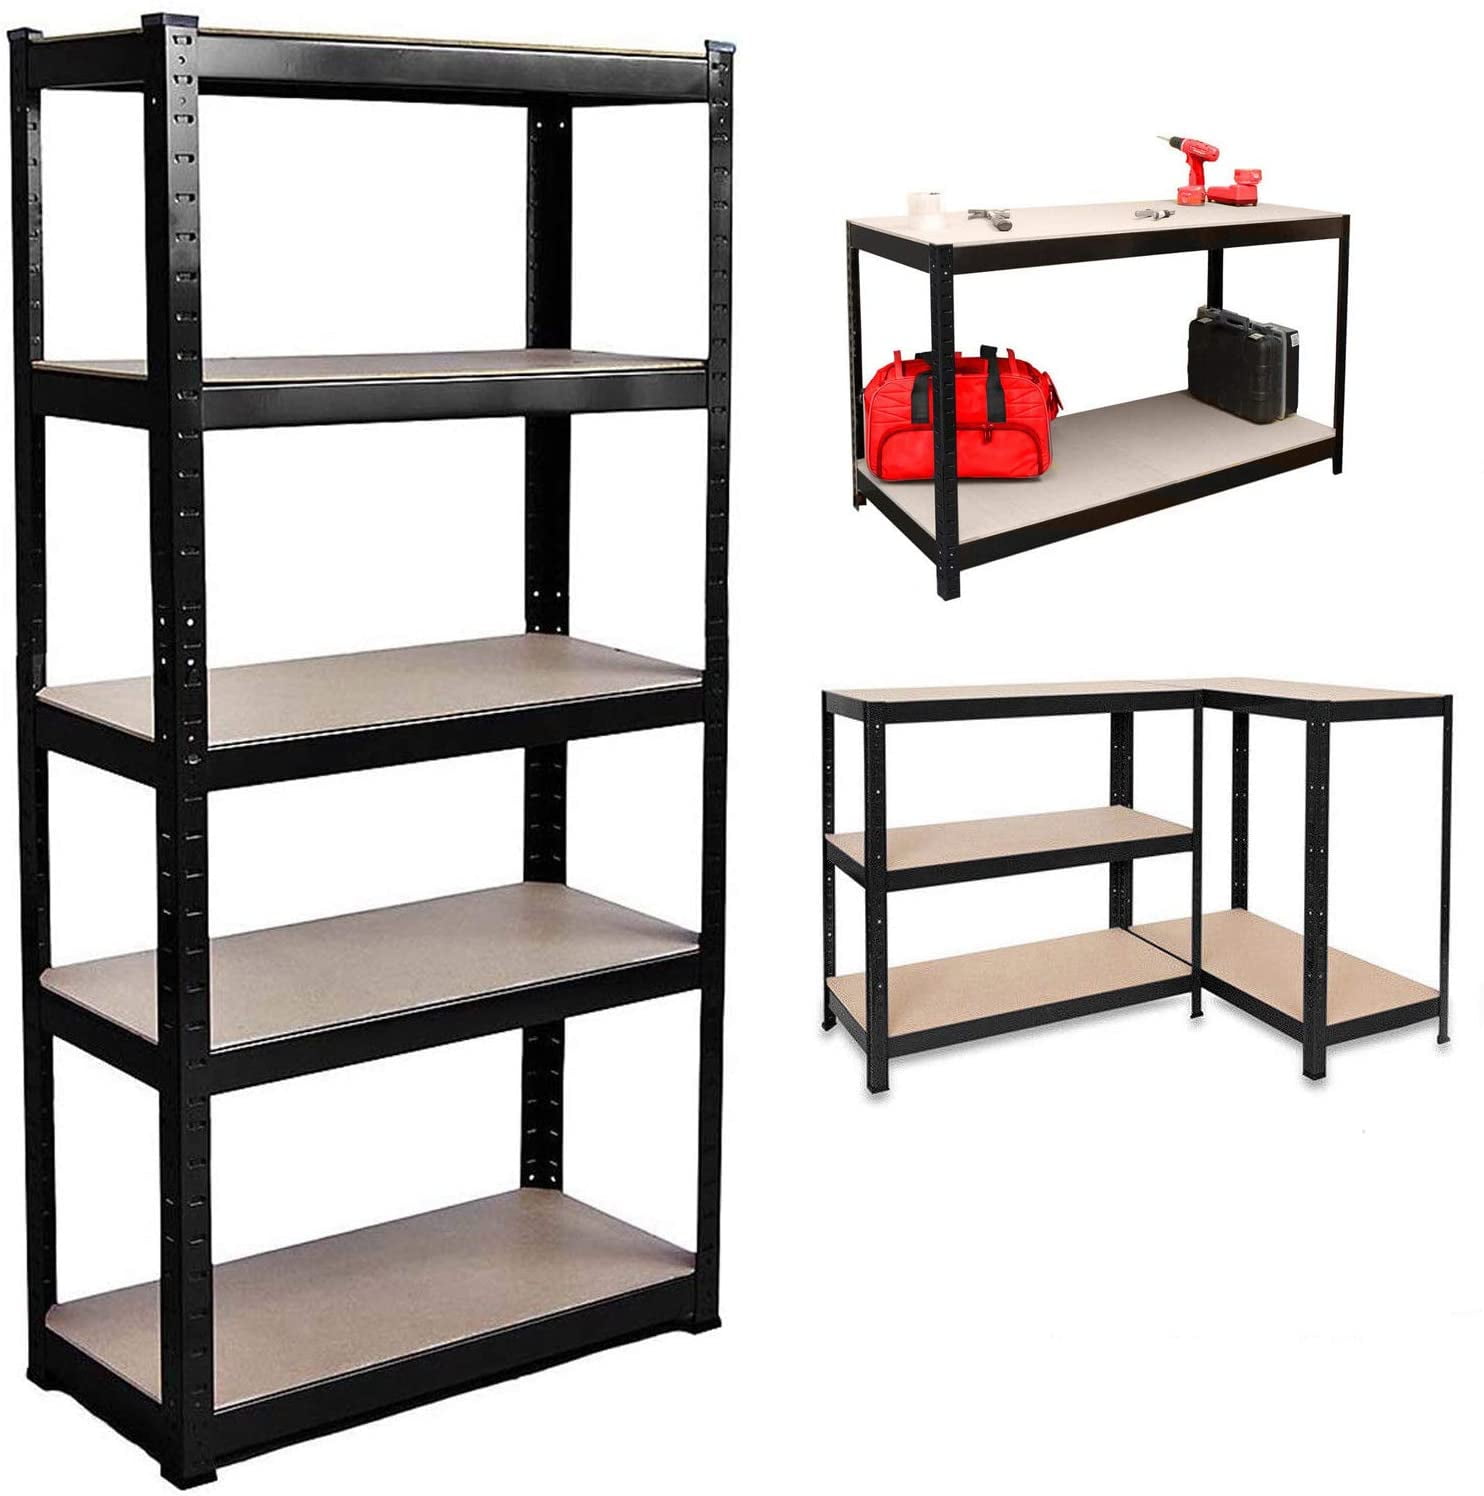 Shelving Shelves For Garage/Shed/Warehouses/Stockrooms/Office 5 Tier Compact Heavy Duty Racking Boltless Easy Assembling Adjustable Design 875KG Large Capacity,180x90x40cm,Red 